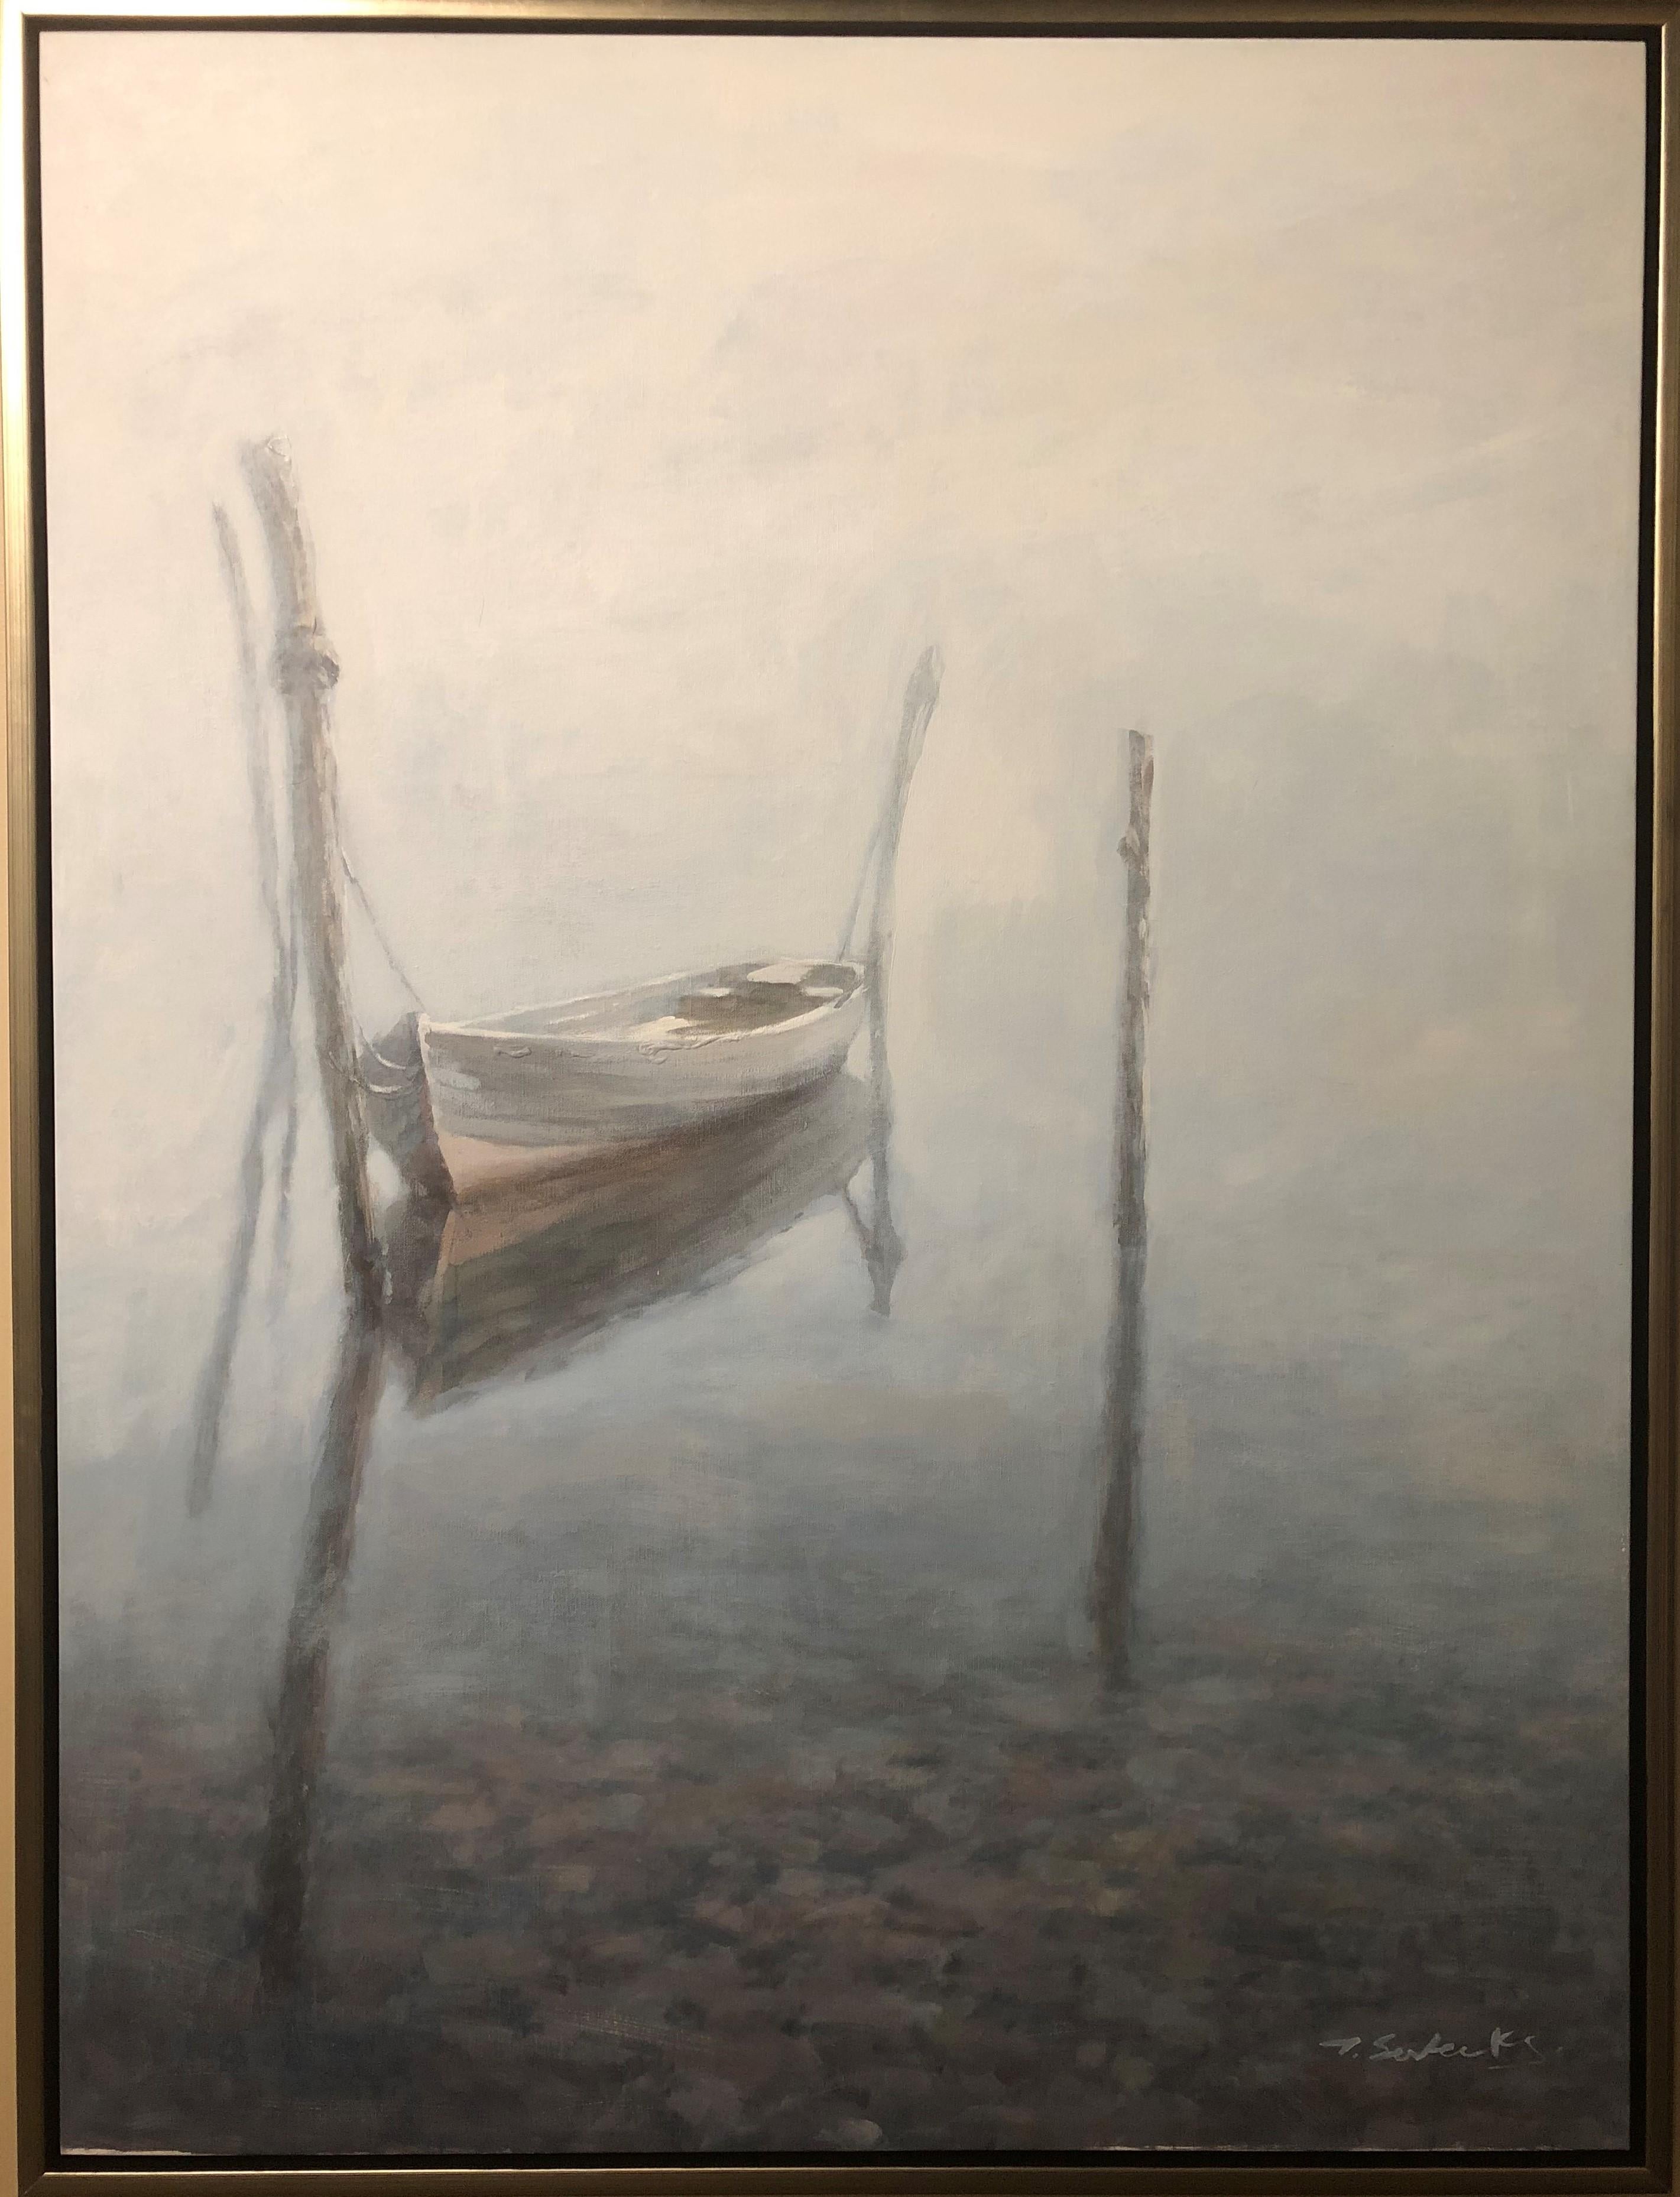 Item is in excellent condition and has only been displayed in a gallery setting. Item includes custom built frame; framed dimensions are approximately 38 x 50 inches.

T. Sevecks was born on May 19th, 1972 in Gillim Providence. Ever since he was a